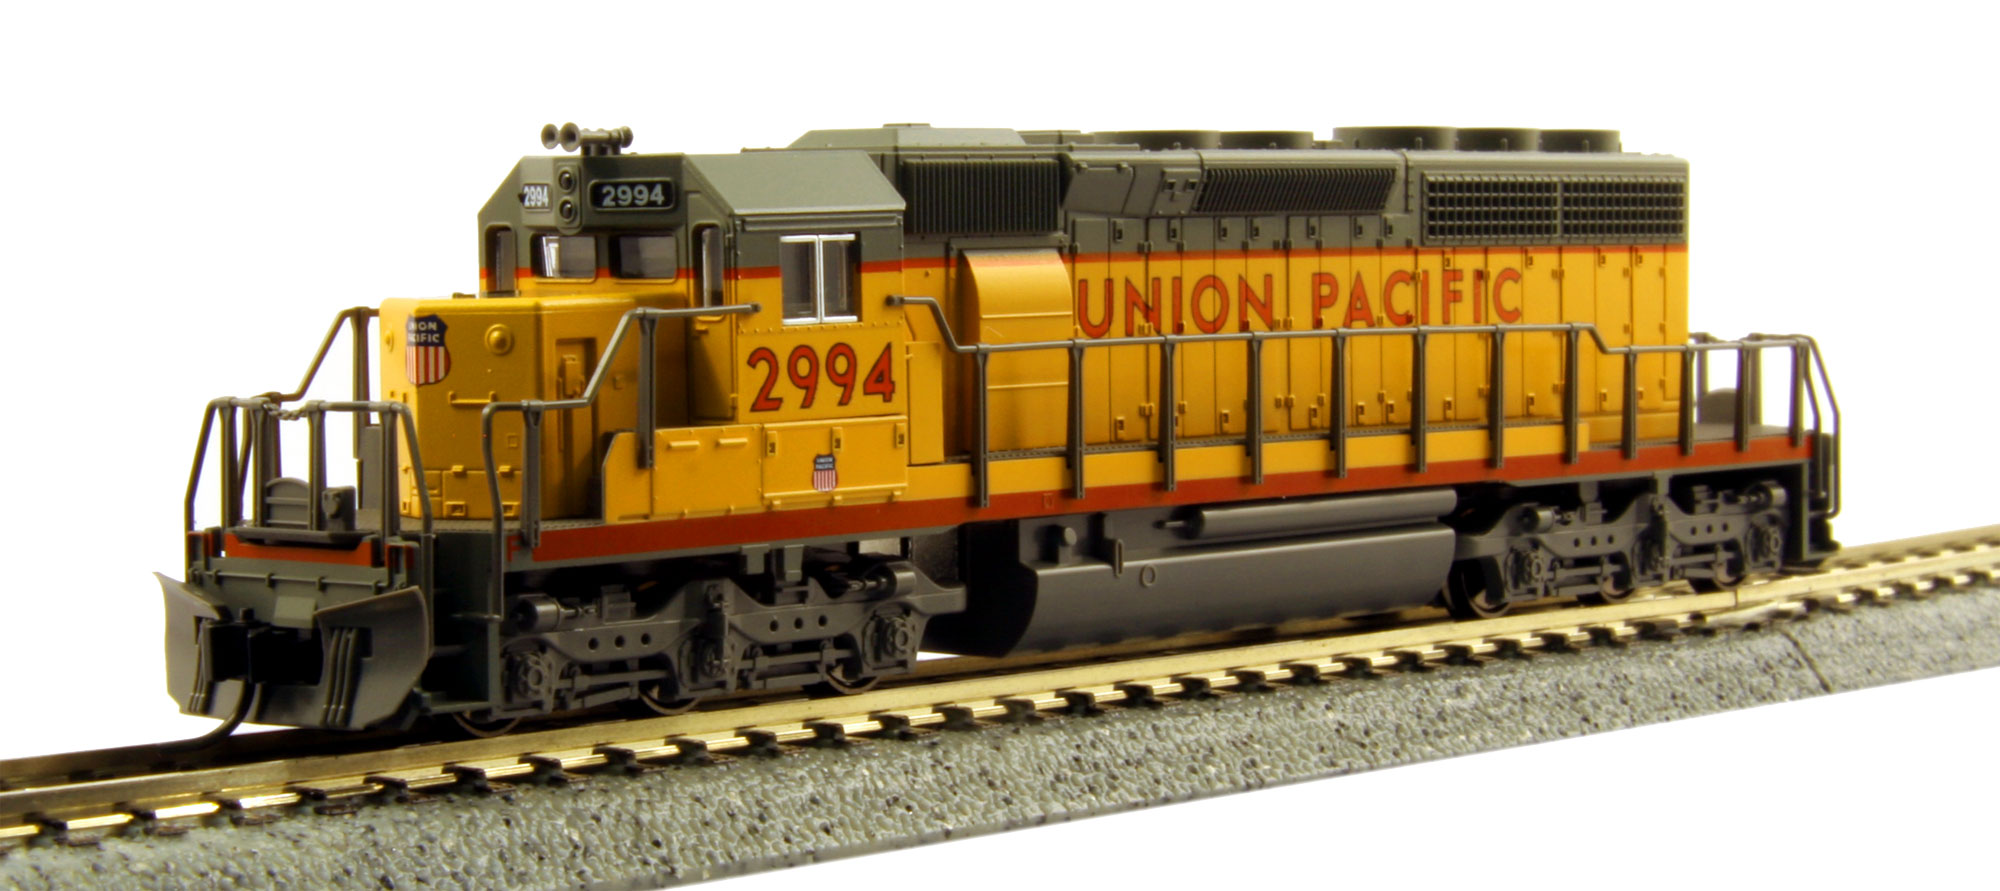 KATO 37-11e EMD Nw2 Union Pacific up 1047 Diesel Locomotive Engine HO Scale for sale online